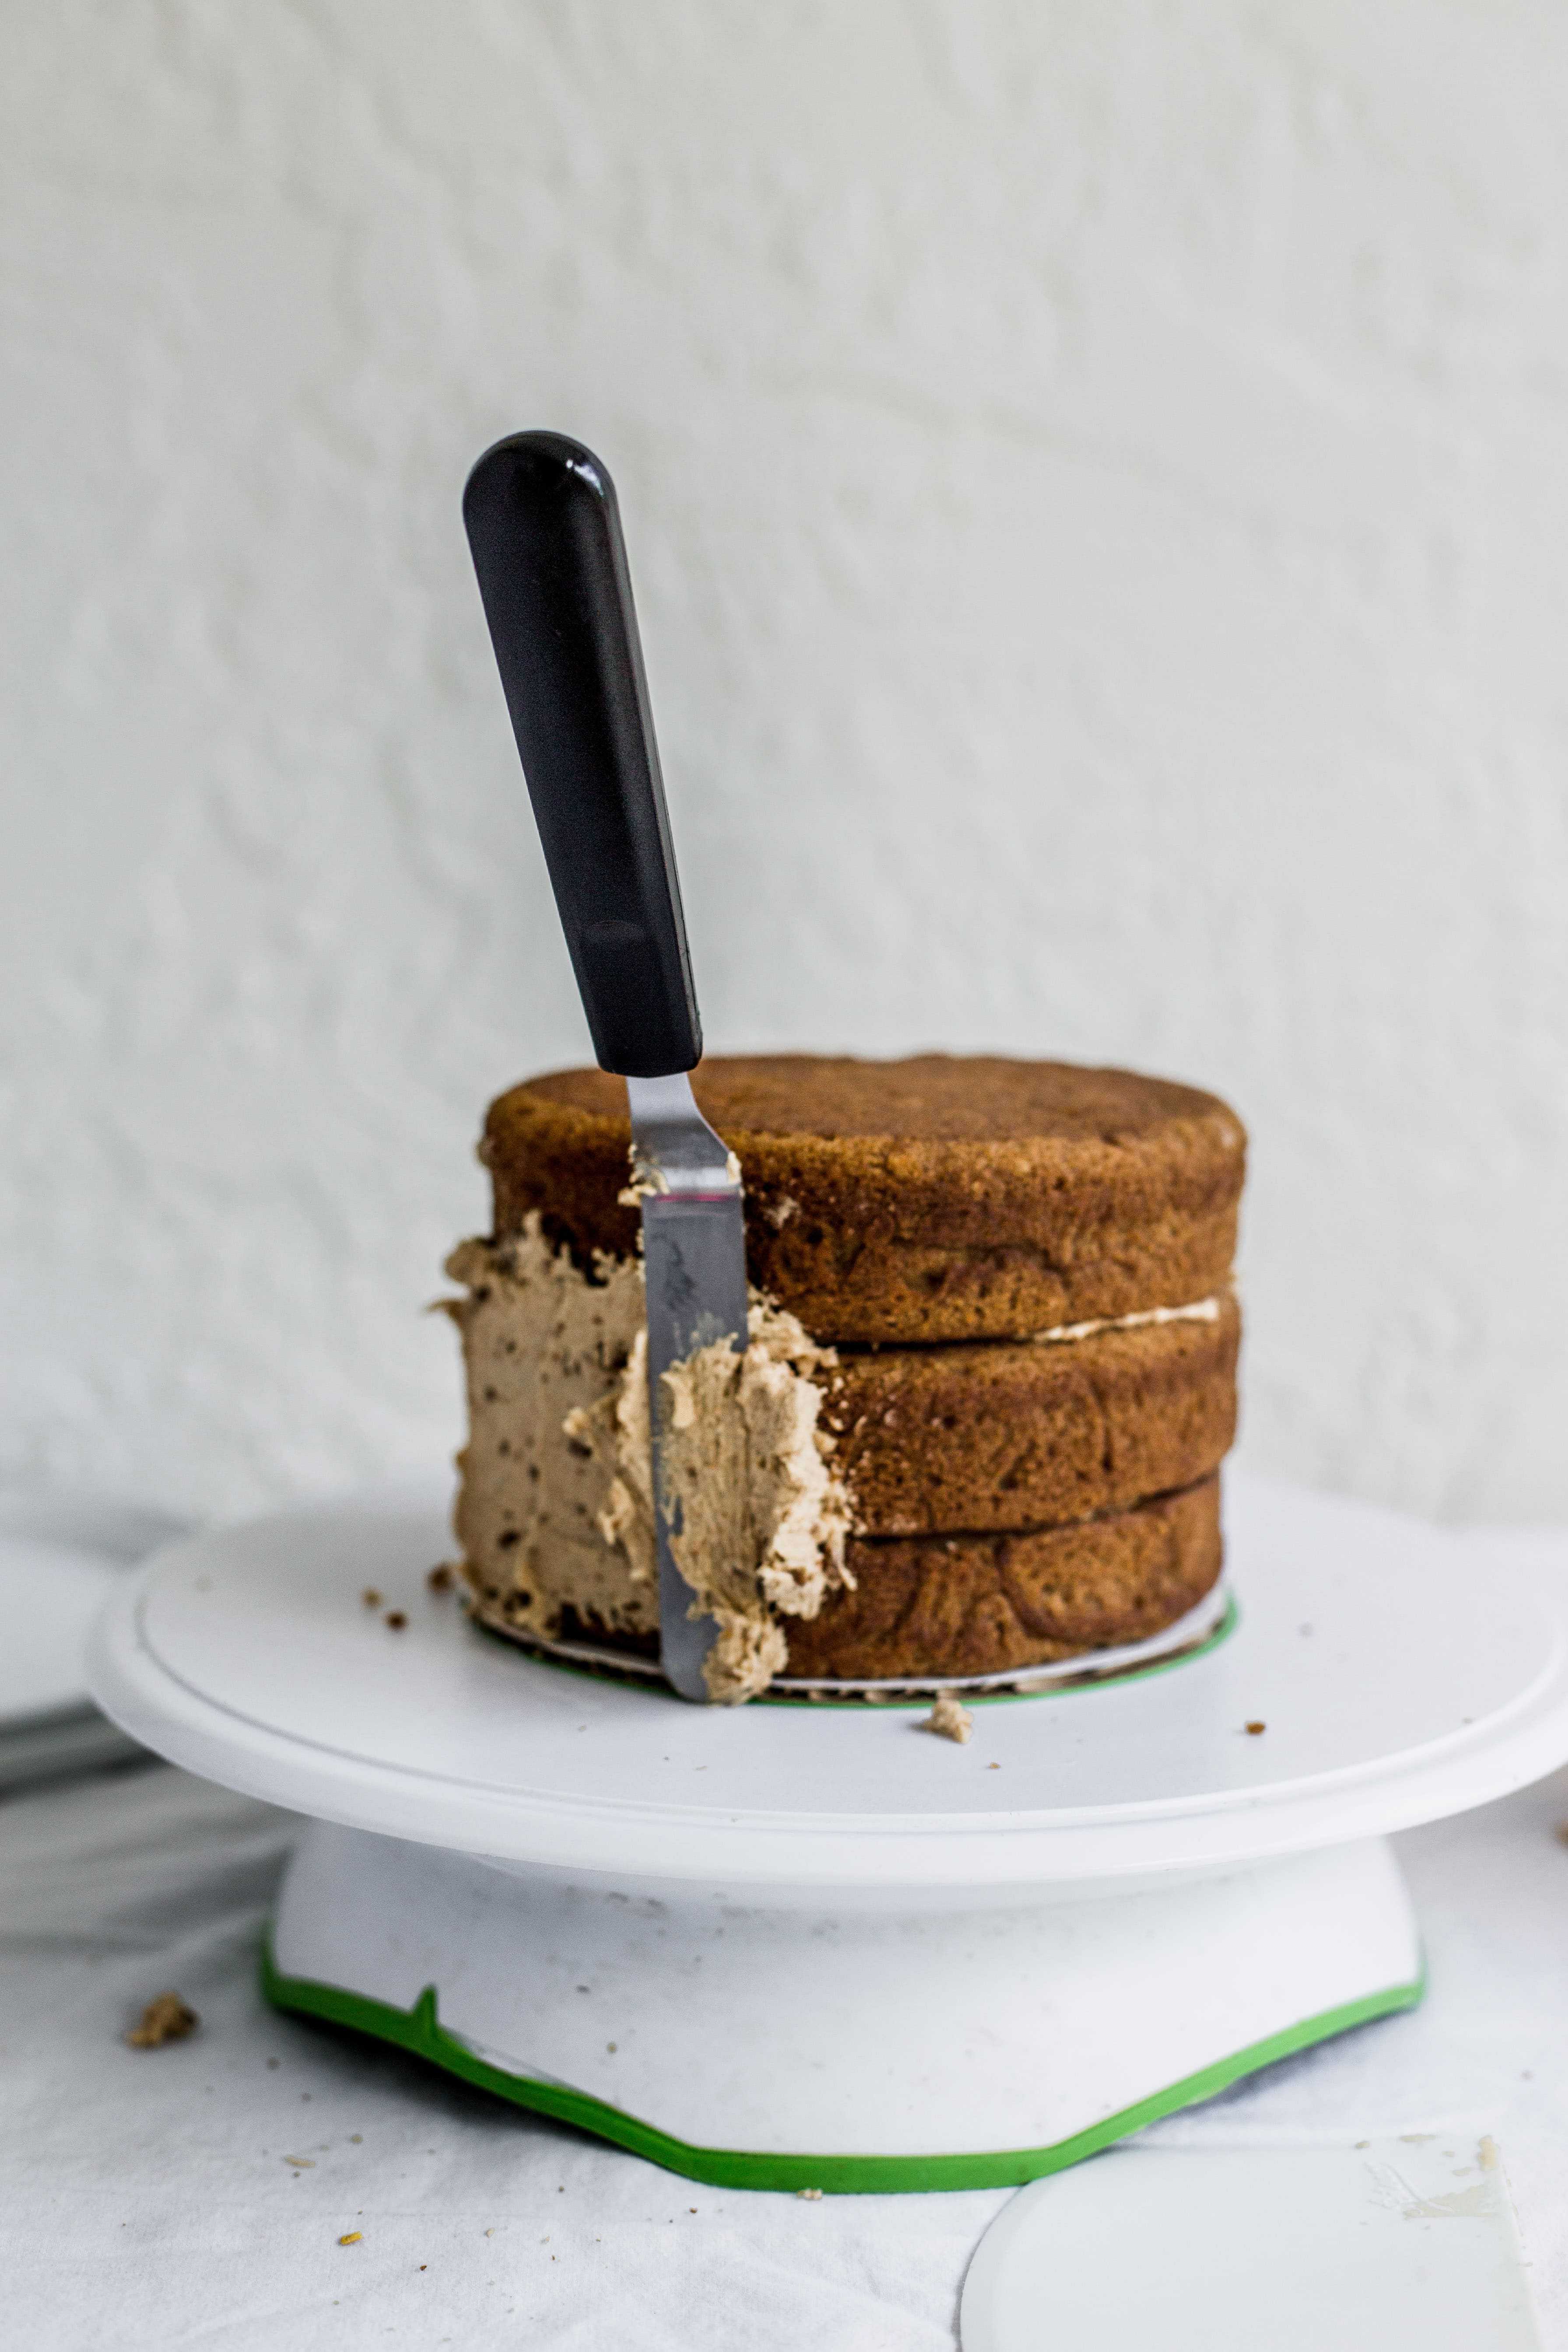 An offset spatula lifting up a cake on a white turntable